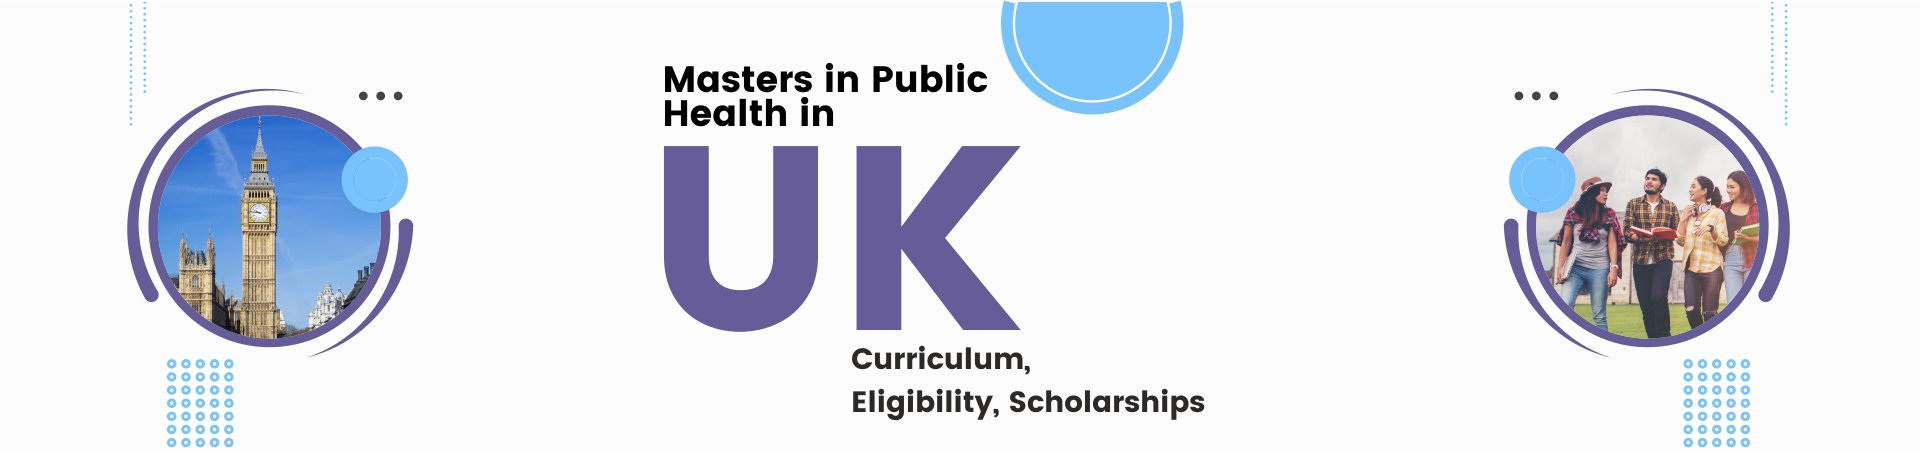 Masters in Public Health in UK- Curriculum, Eligibility, Scholarships